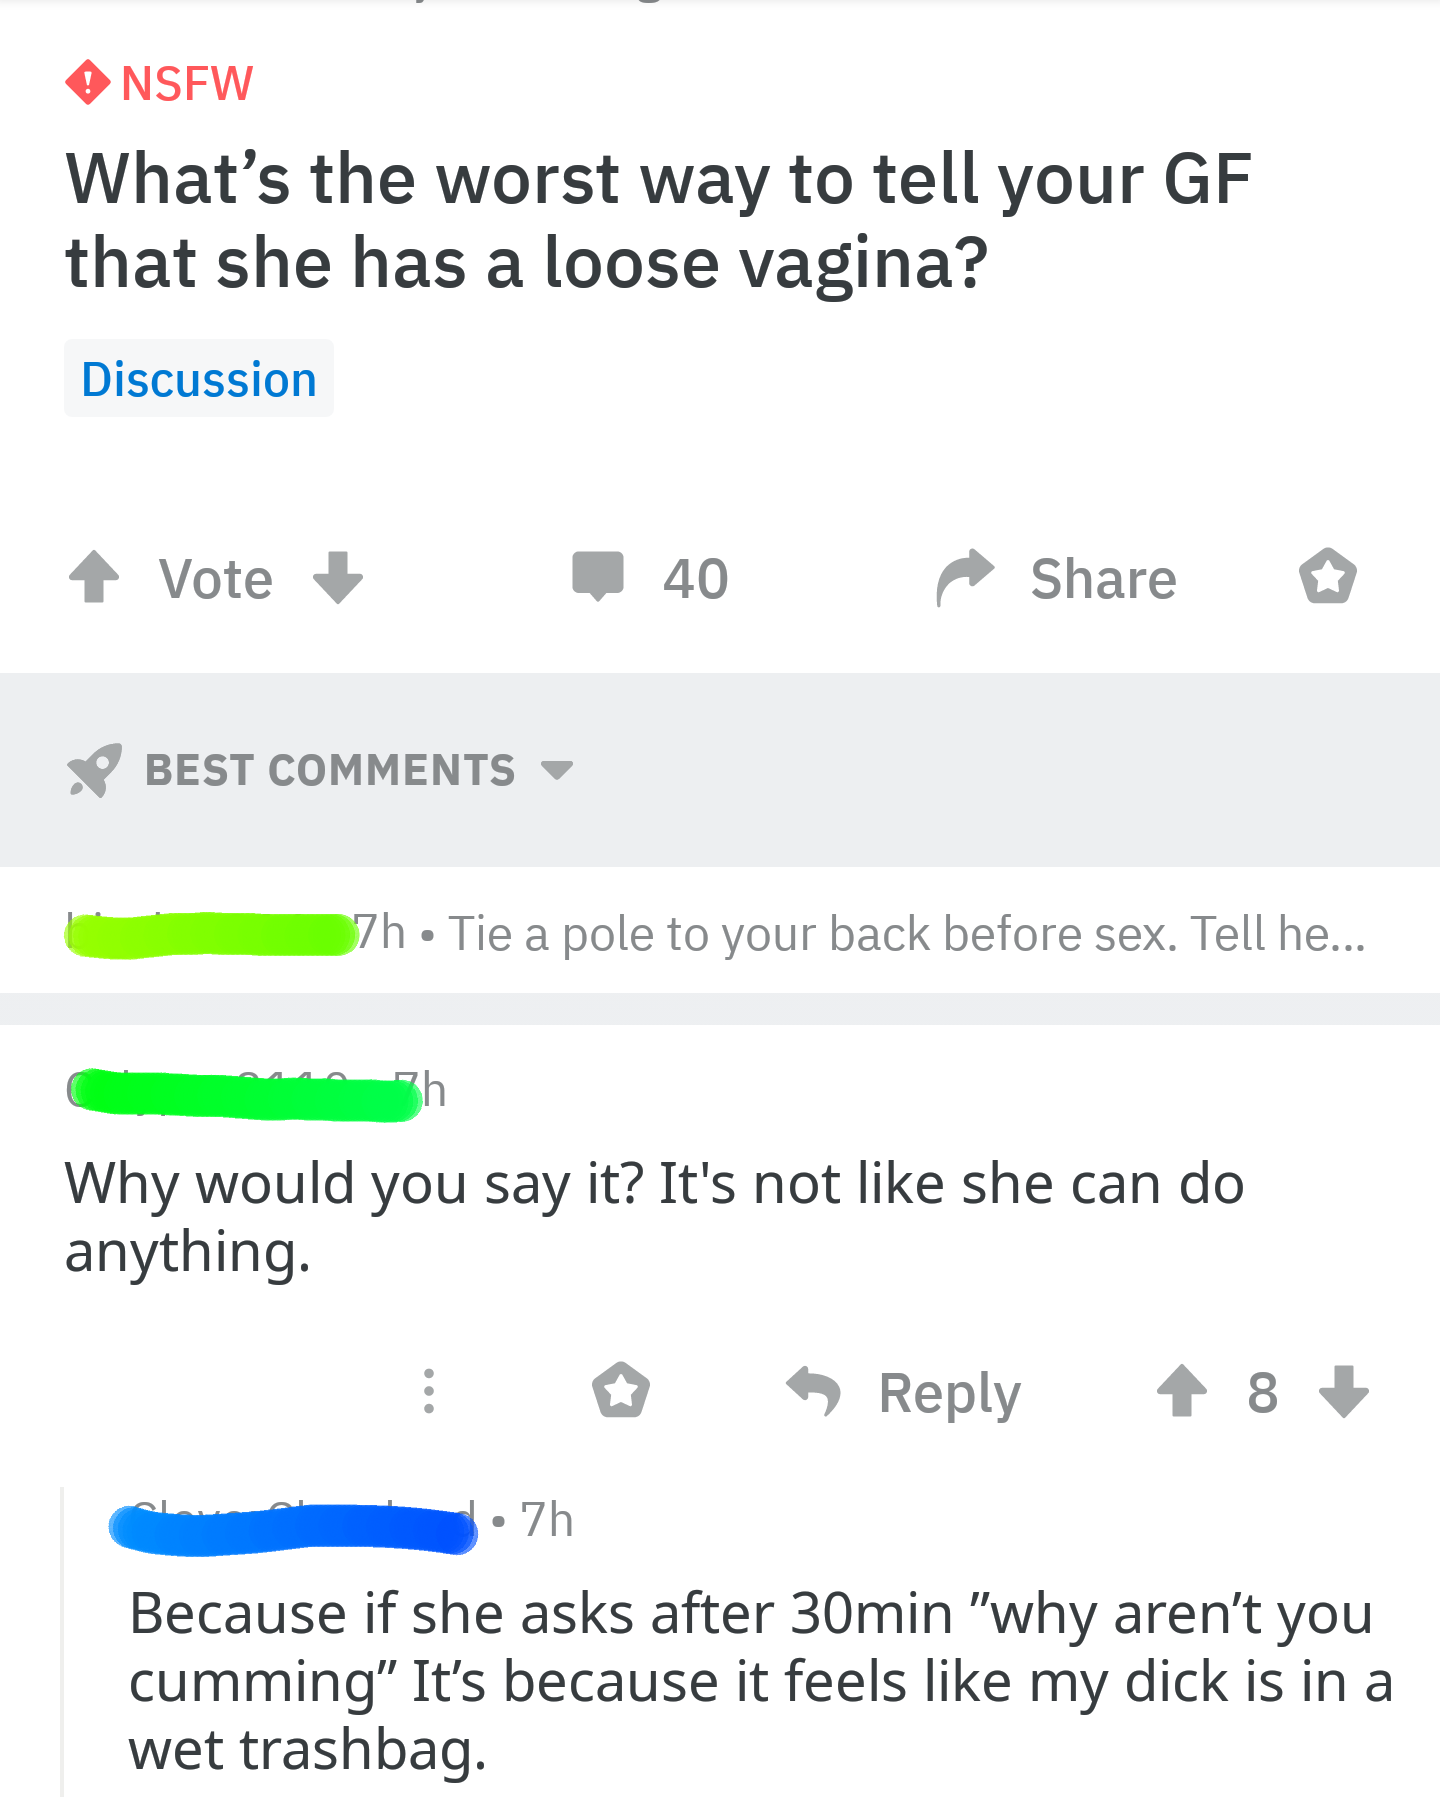 number - O Nsfw What's the worst way to tell your Gf that she has a loose vagina? Discussion Vote 40 Best 7h Tie a pole to your back before sex. Tell he... Why would you say it? It's not she can do anything. 8 .7h Because if she asks after 30min "why aren